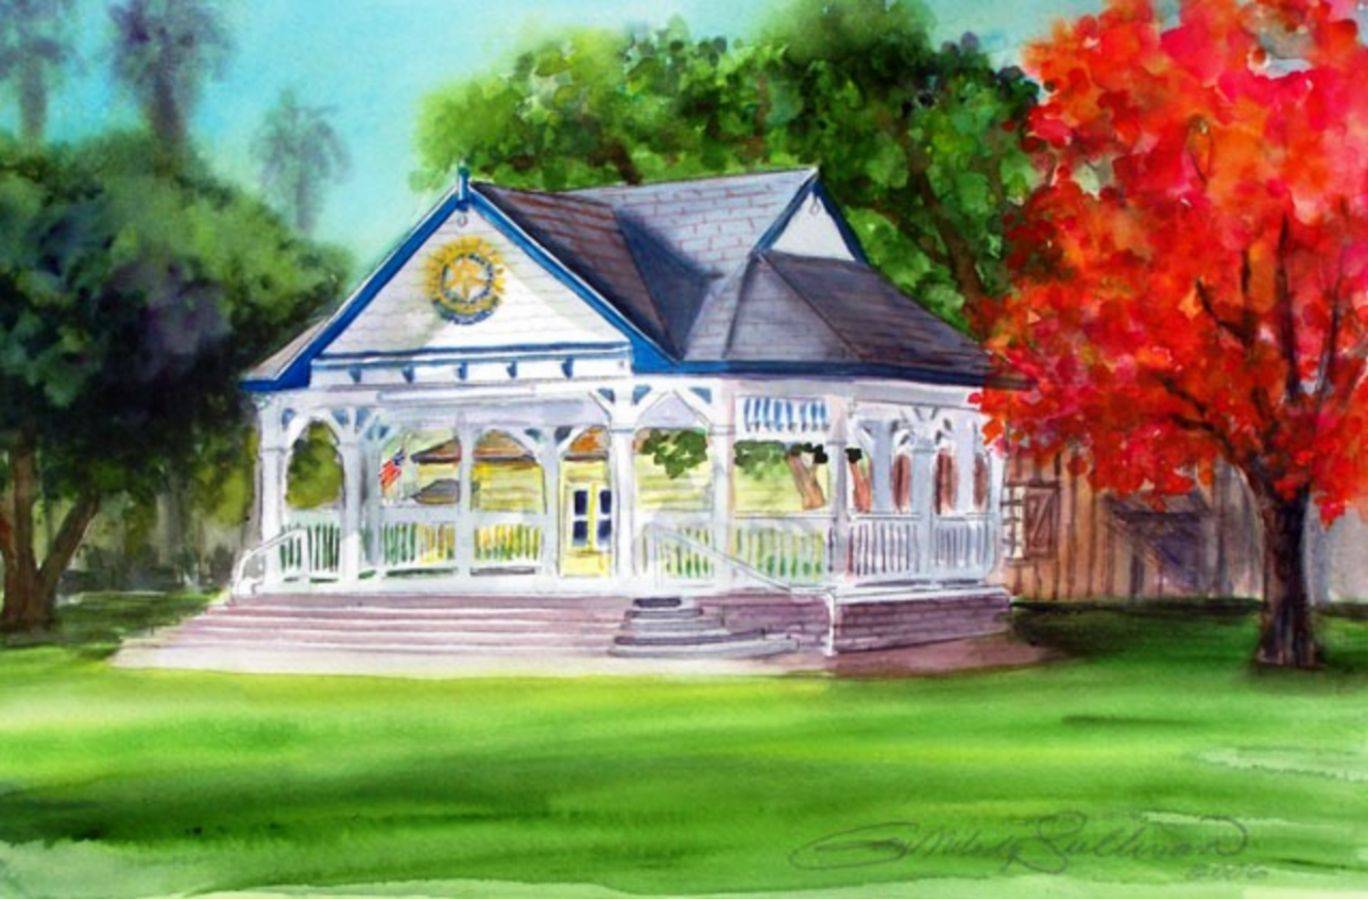 Rotary Club of Arroyo Grande Bandstand